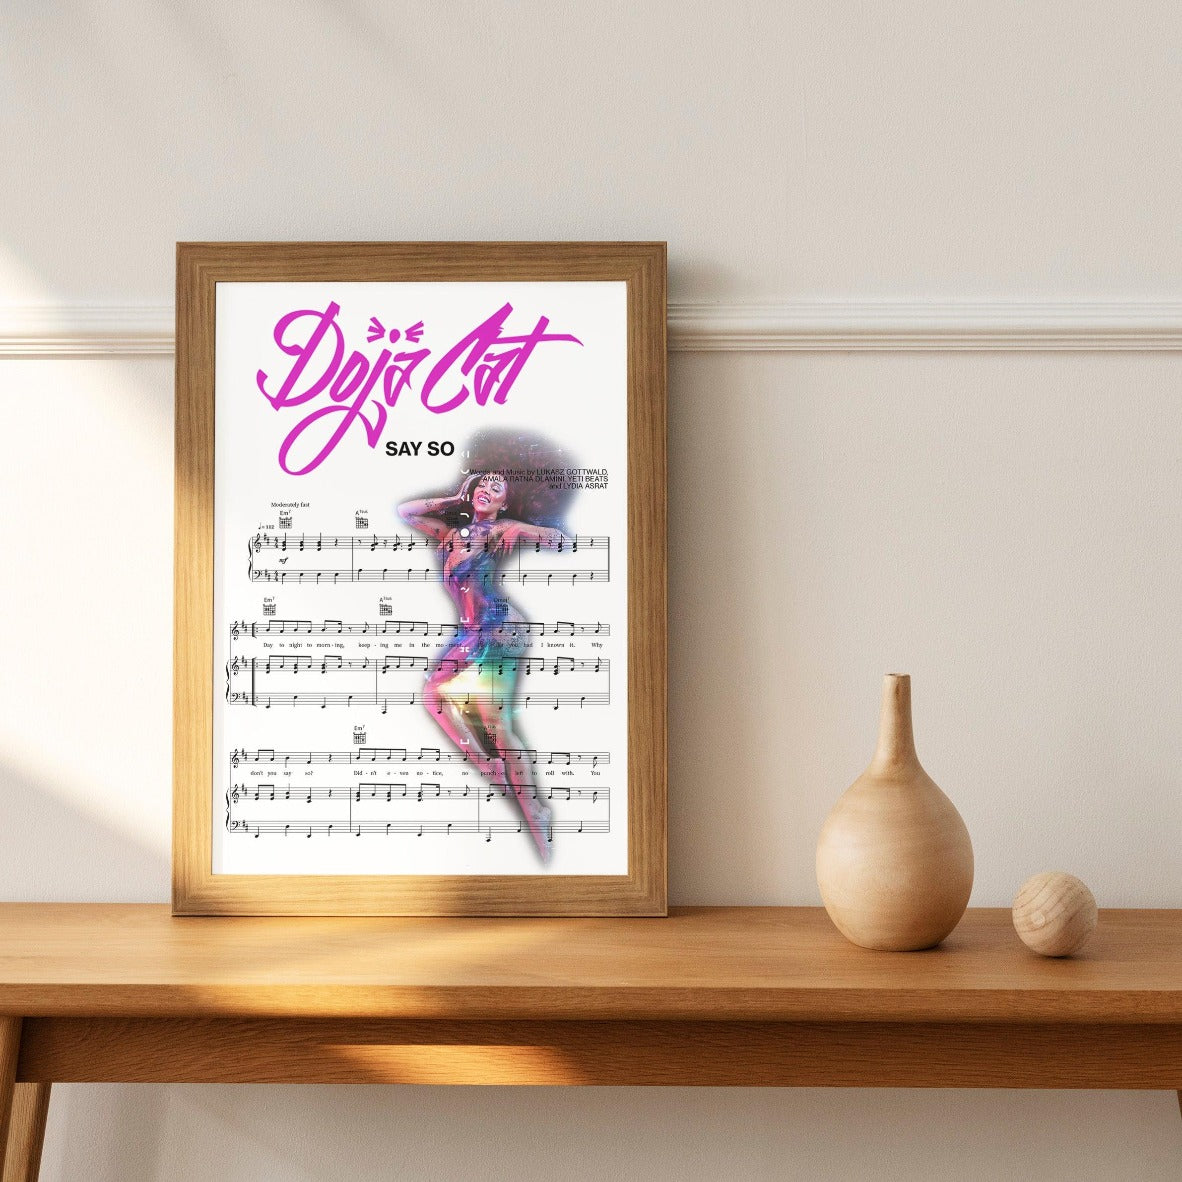 Add character and style to your home with this Doja Cat - Say So Poster. Perfect for any music-lover, this piece of art is brimming with vibrant colors and intricate details that instantly draw the eye. A wonderful way to express your love for music, this wall art does not disappoint in its high-quality print that is sure to stand out in any room of your home. Displaying a memorable quote from one of Doja Cat's songs, this poster makes a timeless addition for those who appreciate an elegant touch.